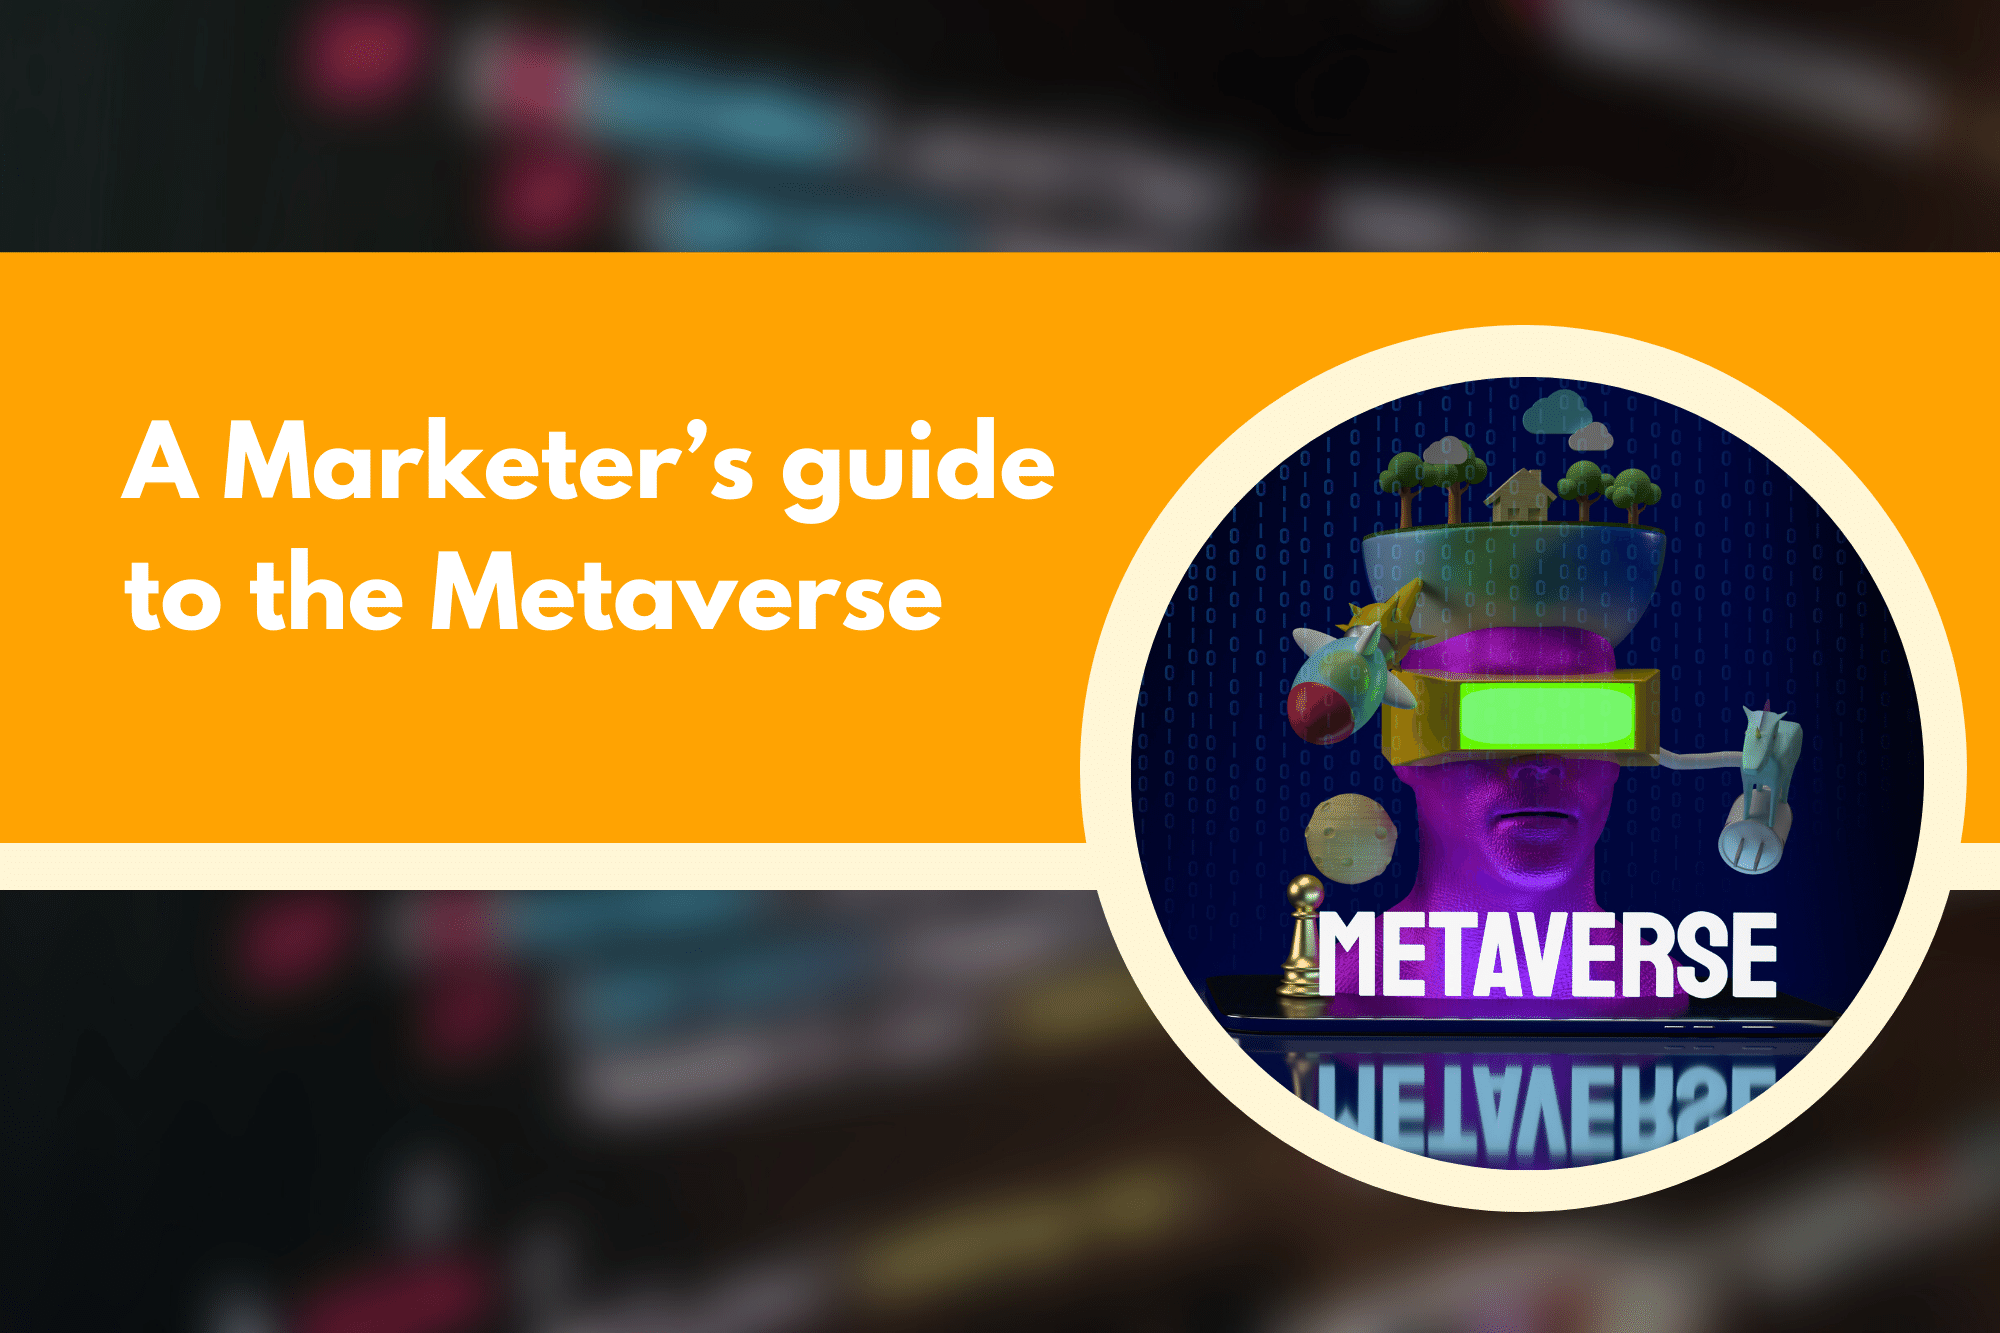 A Marketer’s guide to the Metaverse